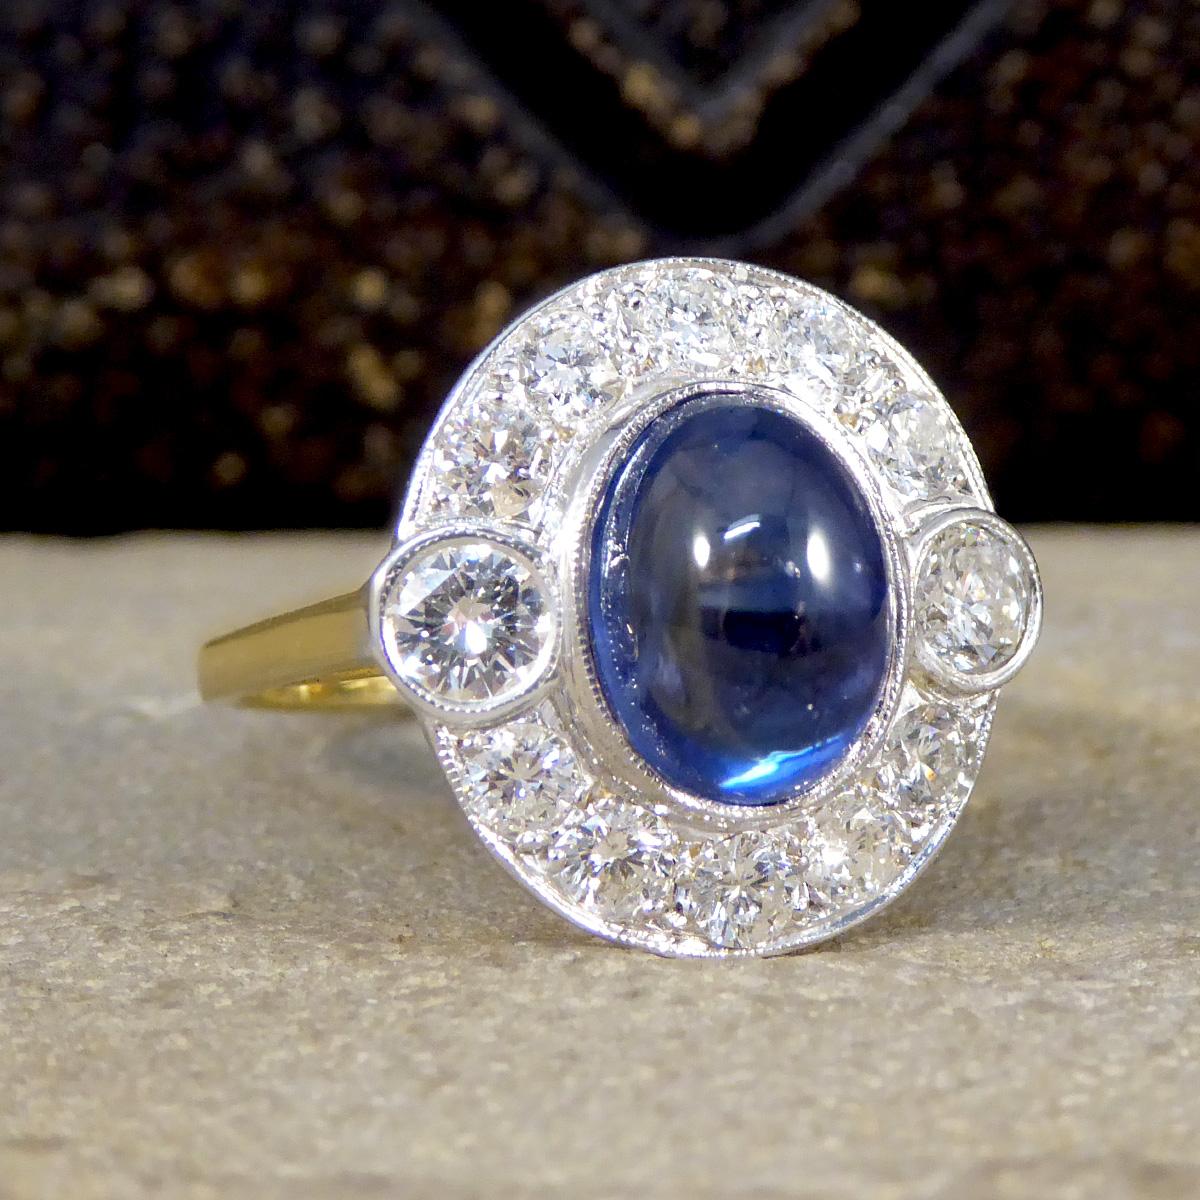 This beautiful ring features an alluring blue cabochon cut Sapphire weighing 5.00ct held securely into place in a rub over bezel 18ct white gold setting. The Sapphire is surrounded by 12 brilliant cut Diamonds weighing 1.16ct in total, with two of